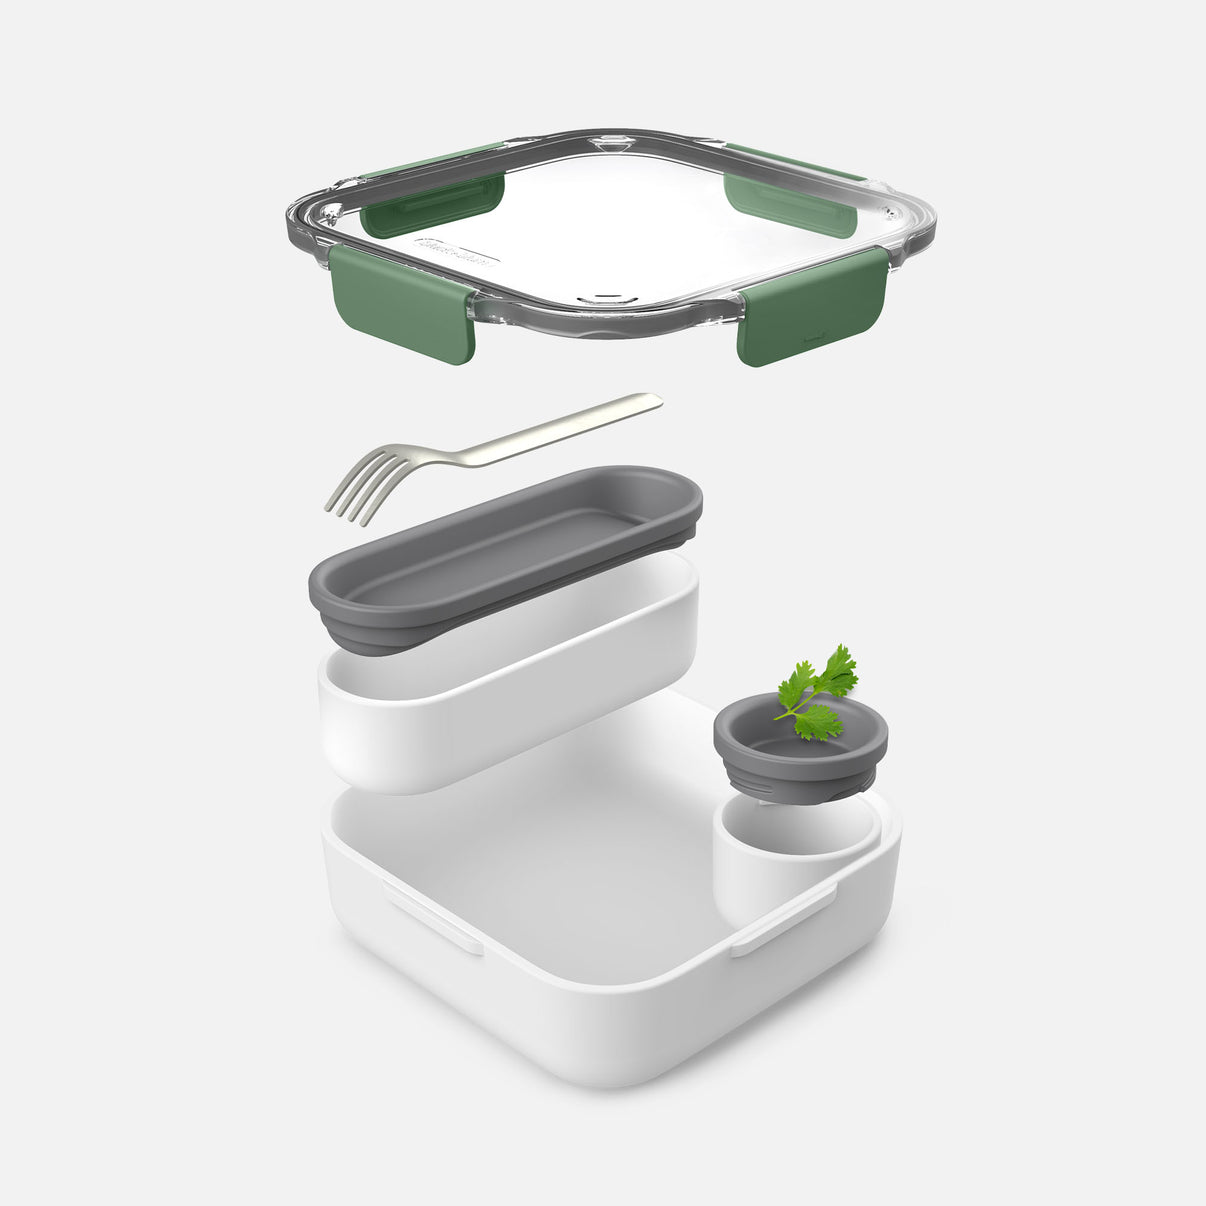 Meal Prep Containers, Black+Blum